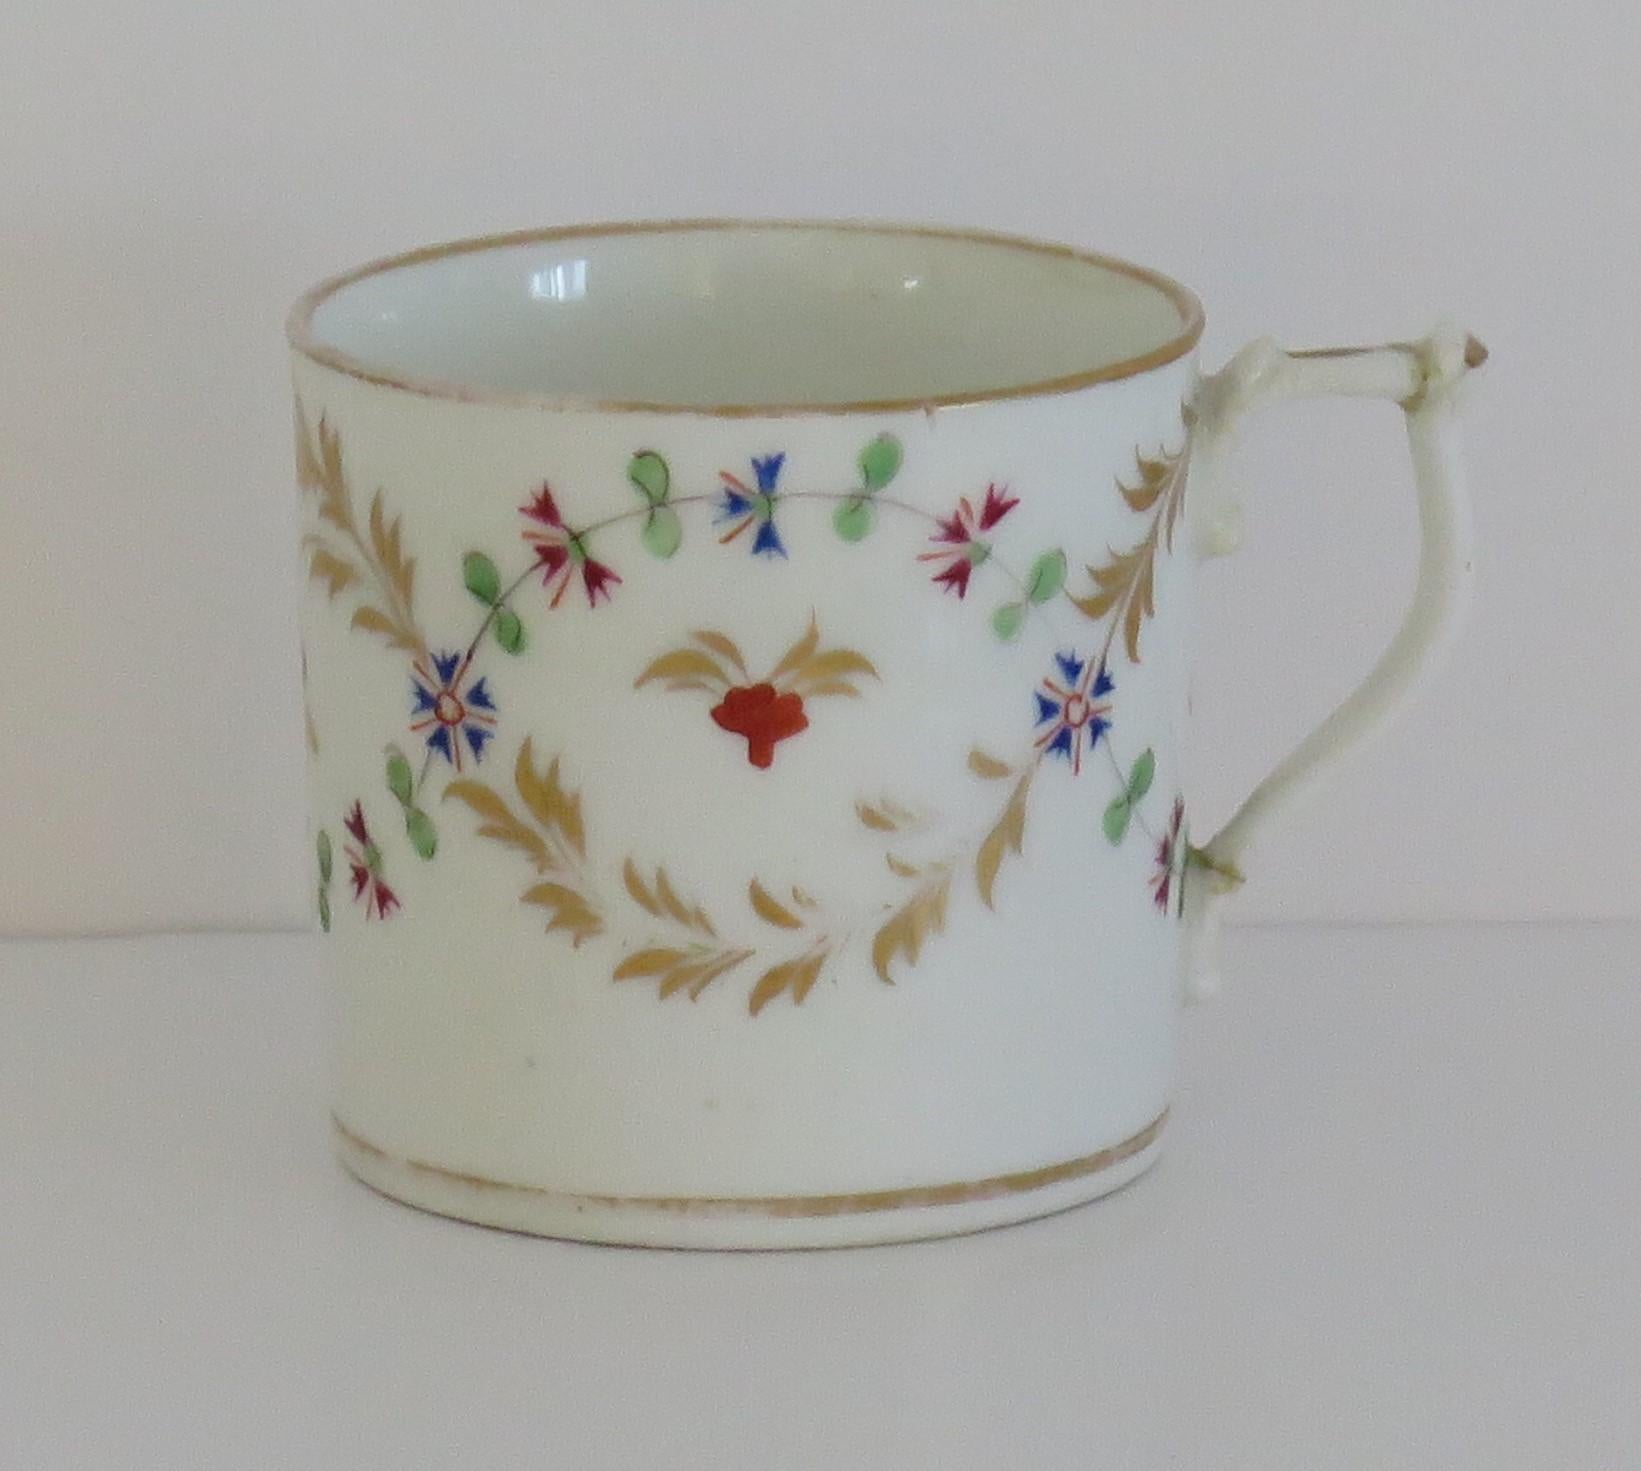 This is a beautiful porcelain Coffee Can by the Derby factory, made during the late Georgian period of the early years of the 19th Century

The cylindrical can tapers slightly to the base and has a wishbone handle.

The decoration is exquisite, all